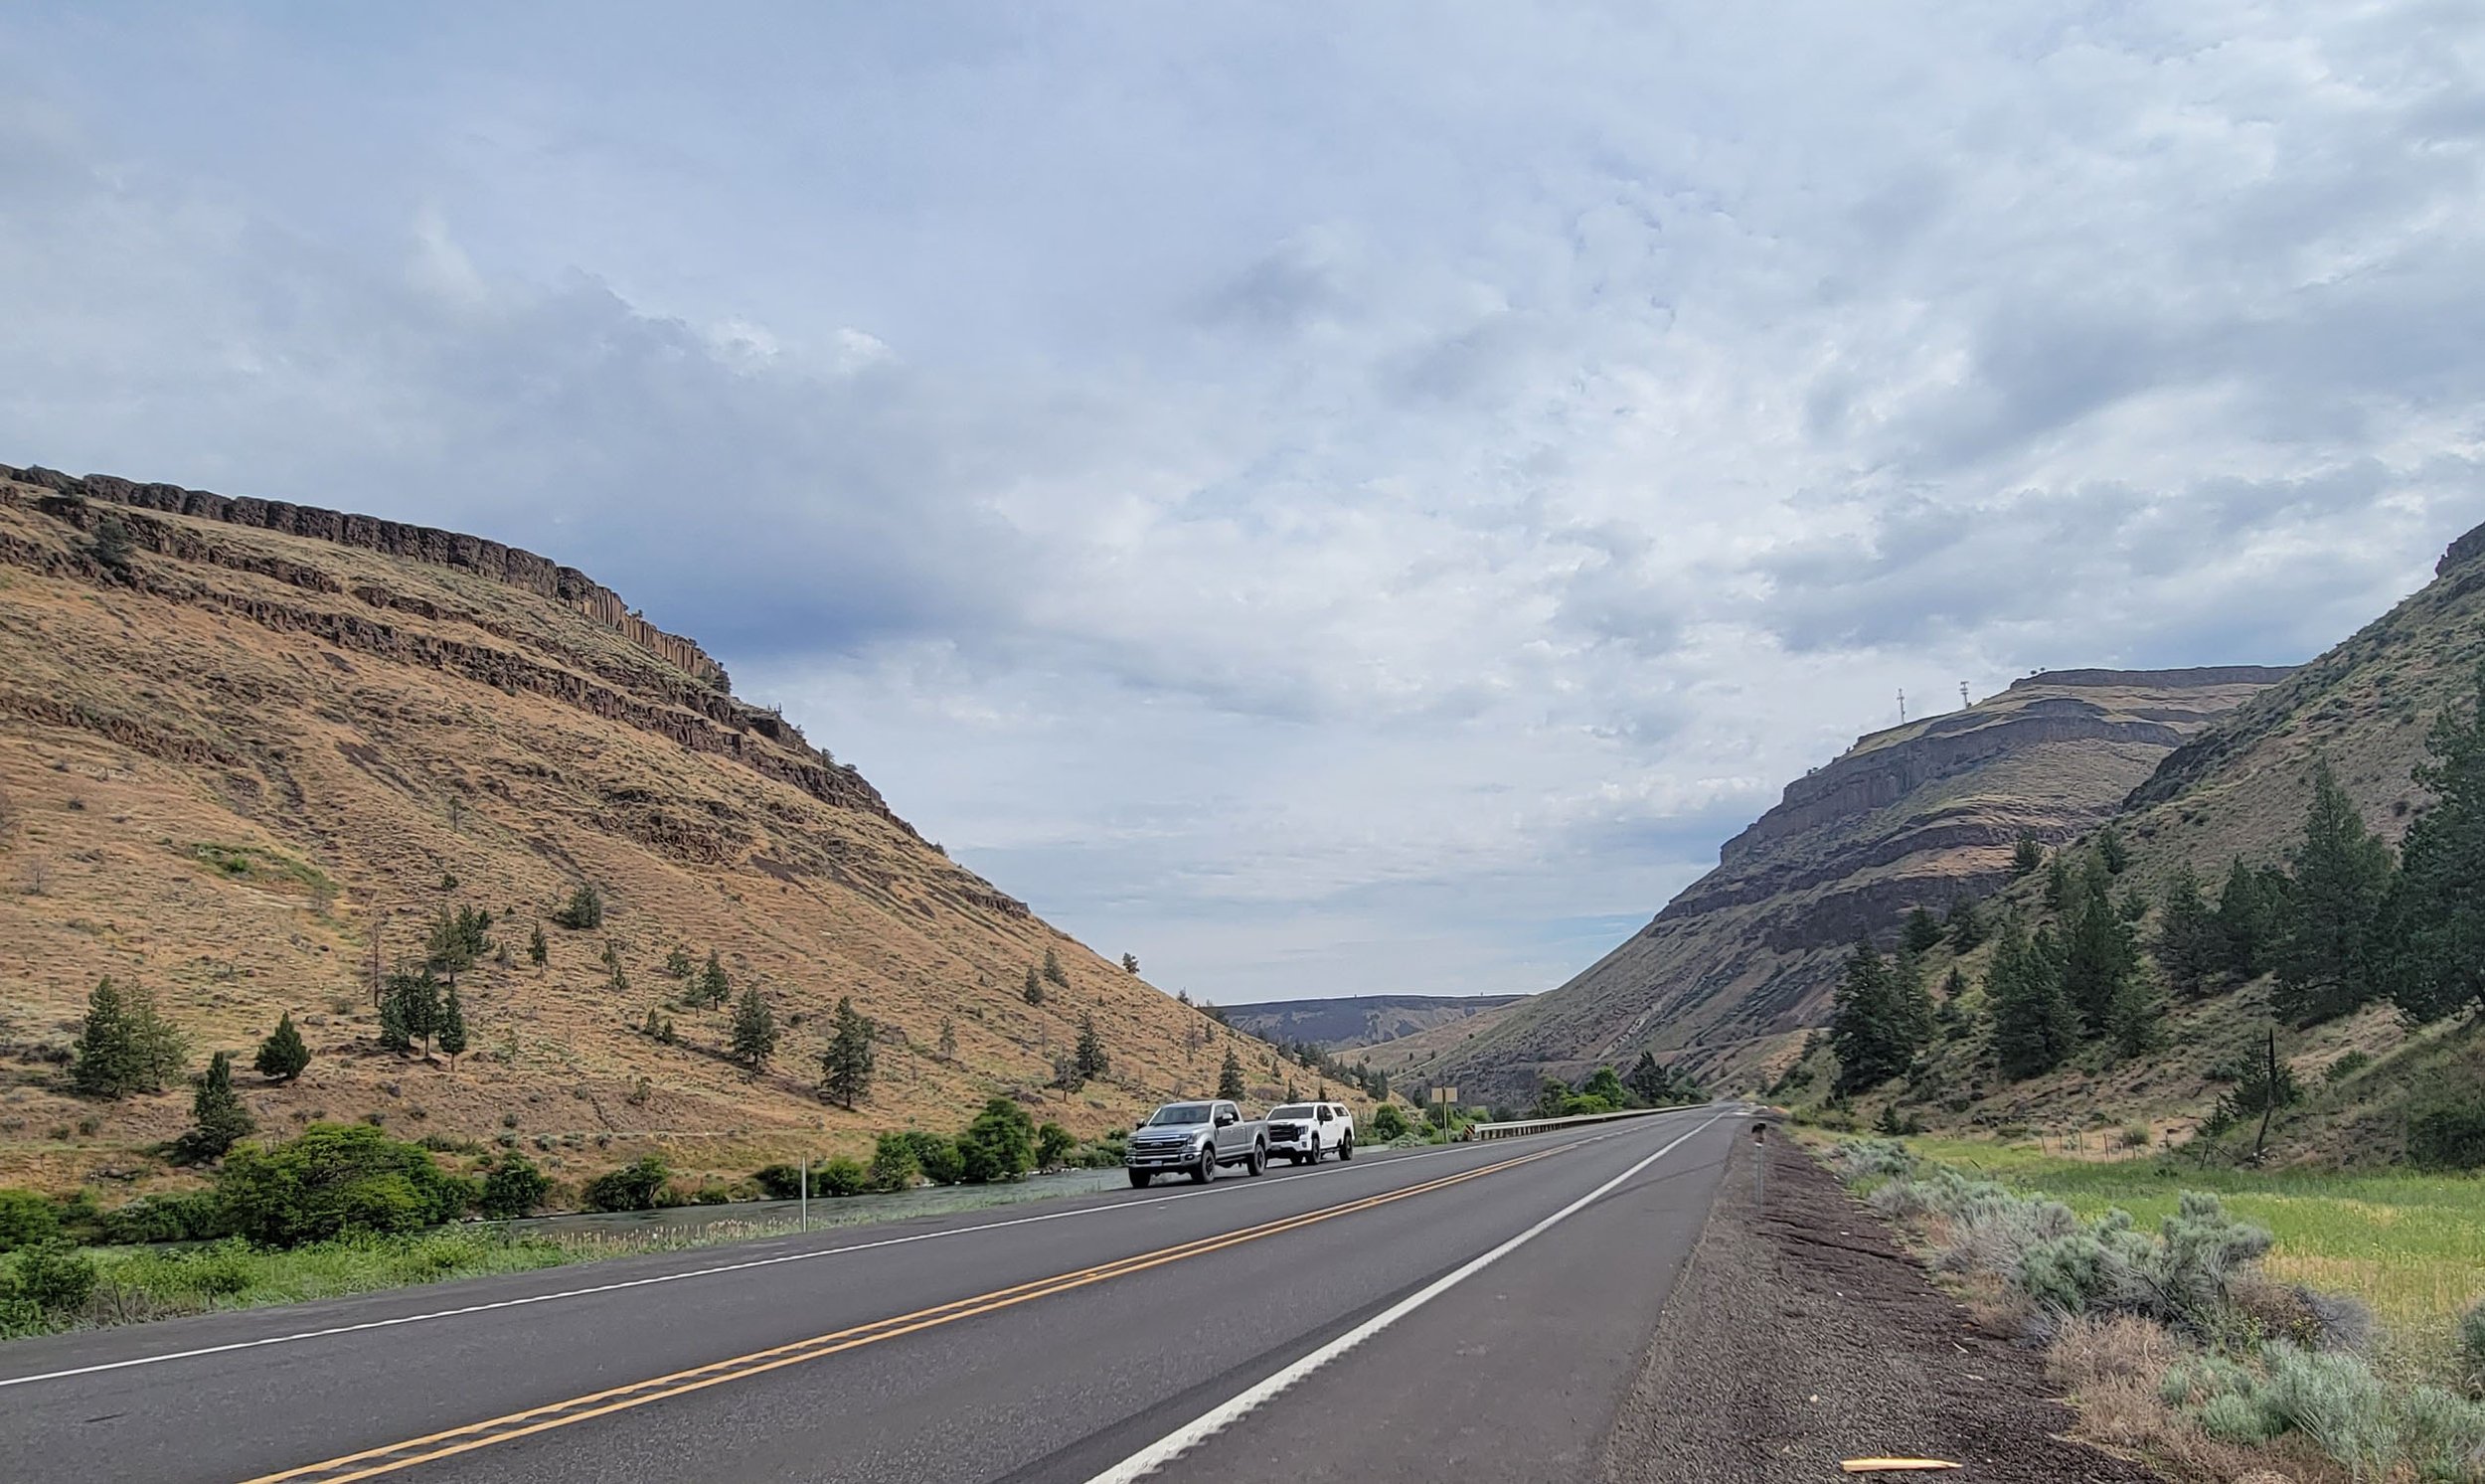  There’s cool badlands/plateau scenery all around eastern Oregon. Oregon: A land of bums and natural beauty. 